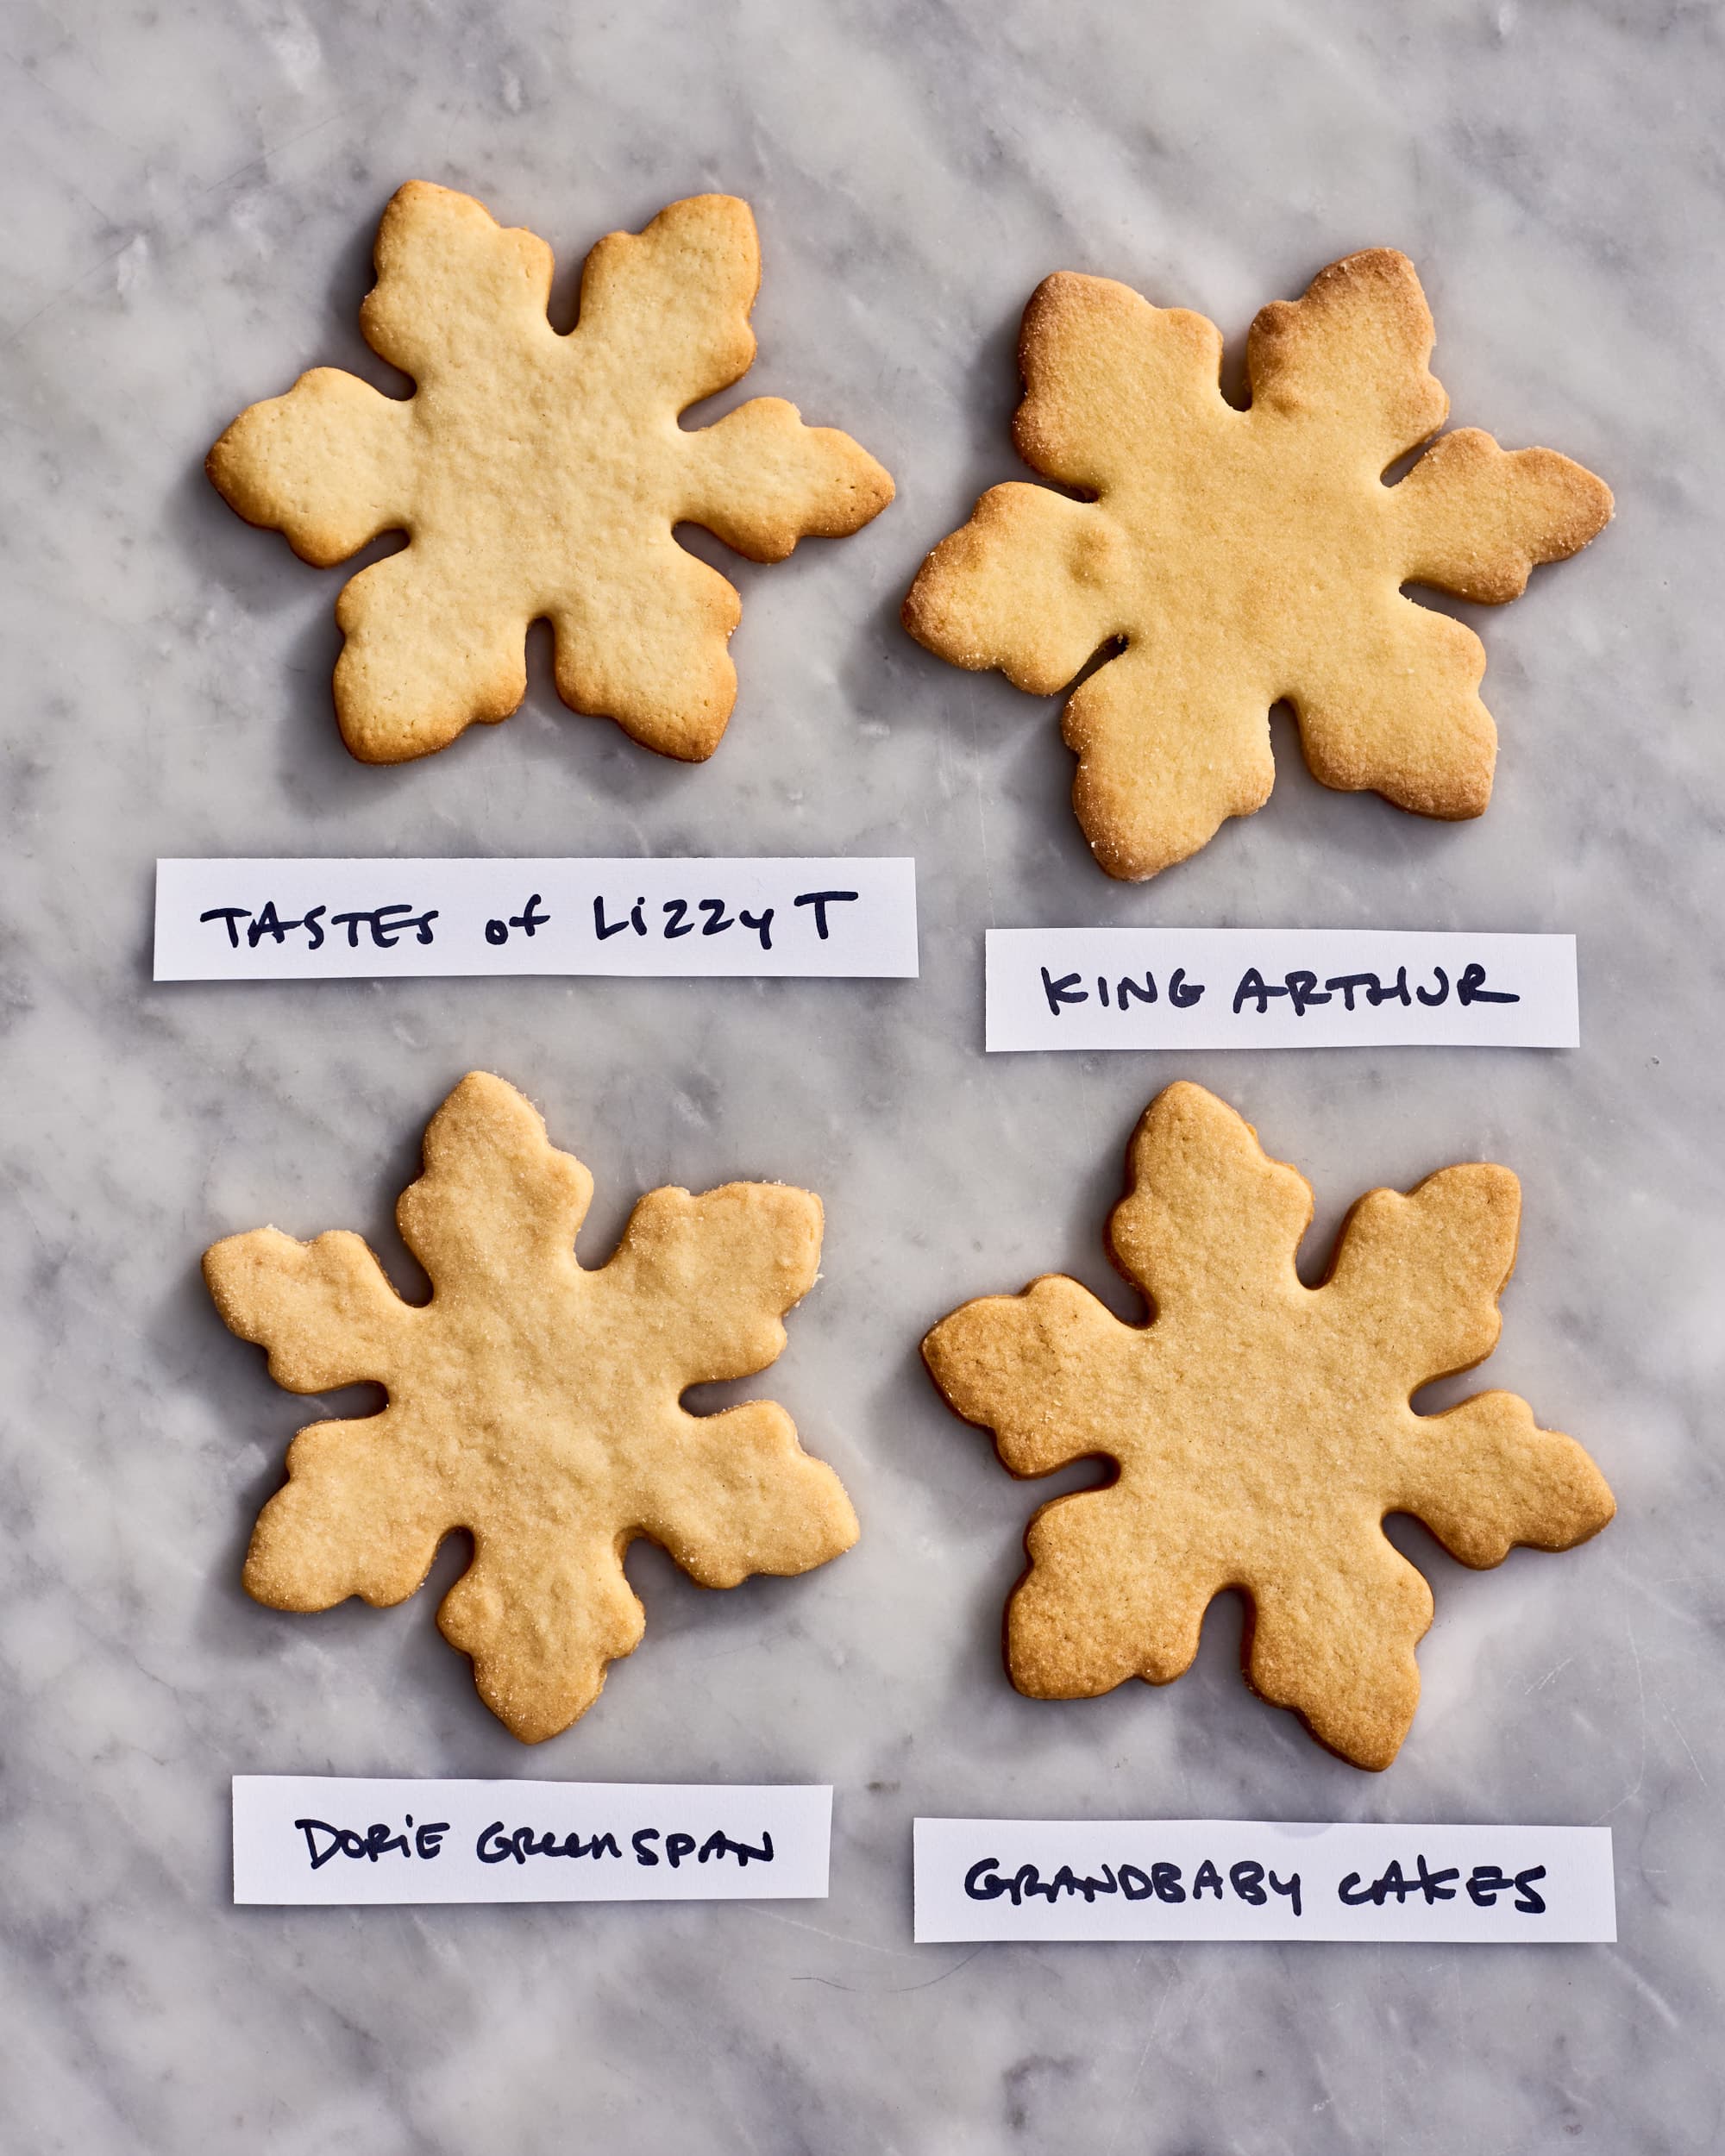 Baking Paper Review: Comparing different types to bake sugar cookies -  Carys Cakes